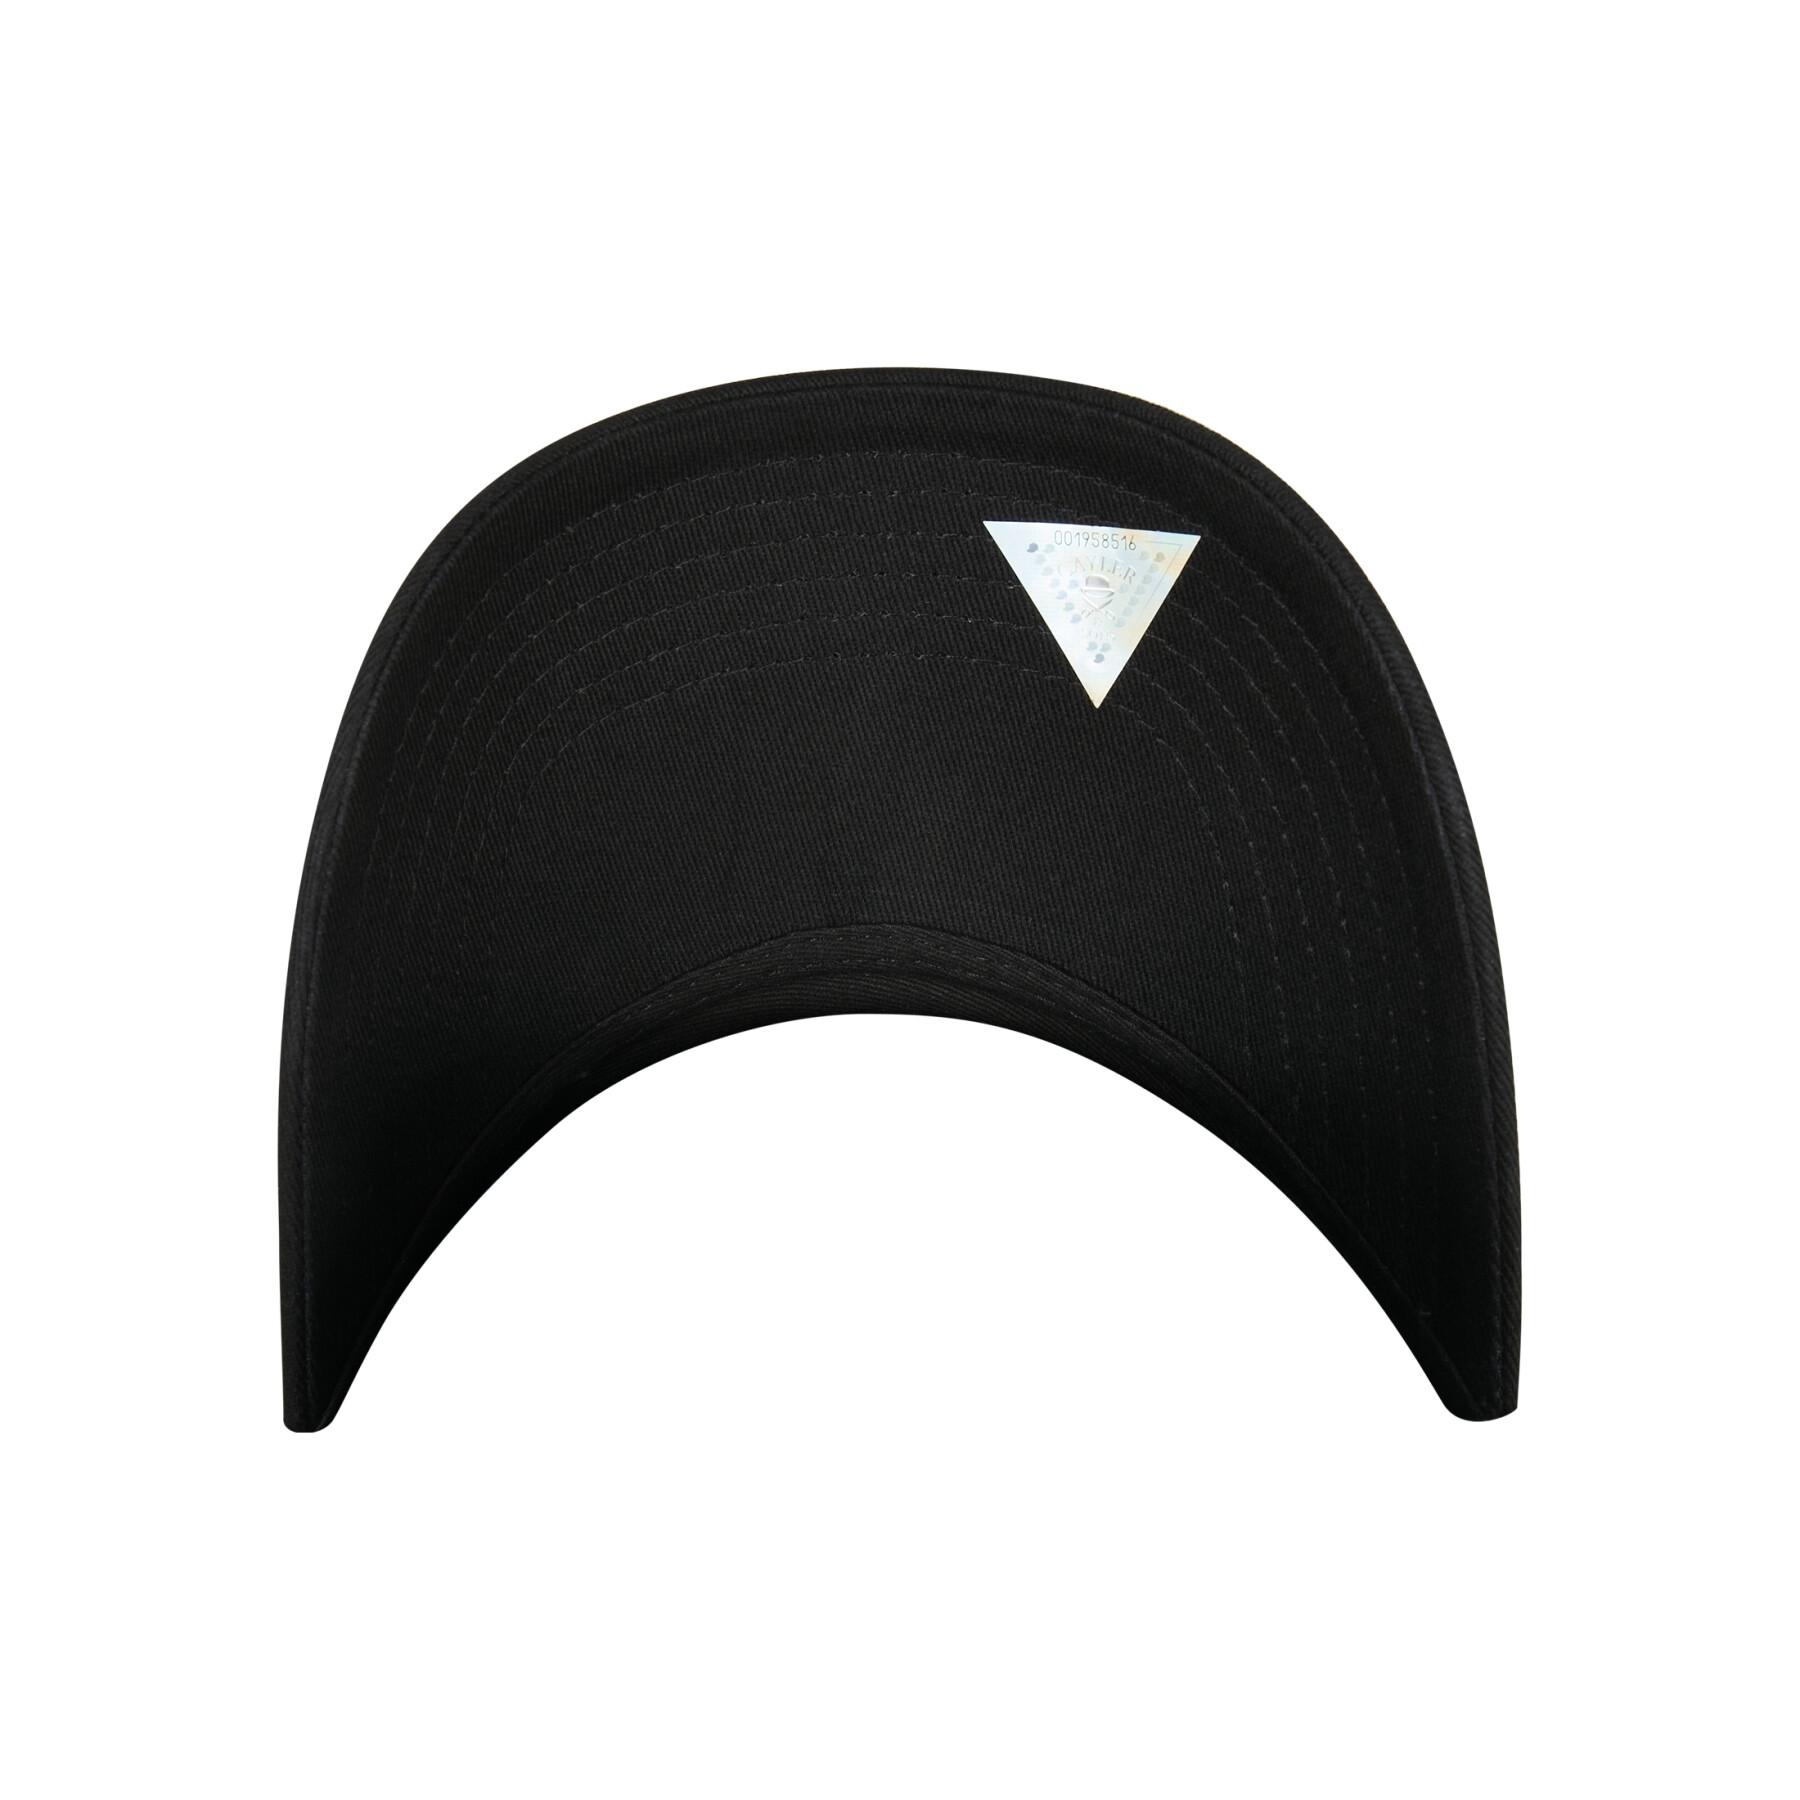 Gorra Cayler & Sons c&s wl we're fucked curved